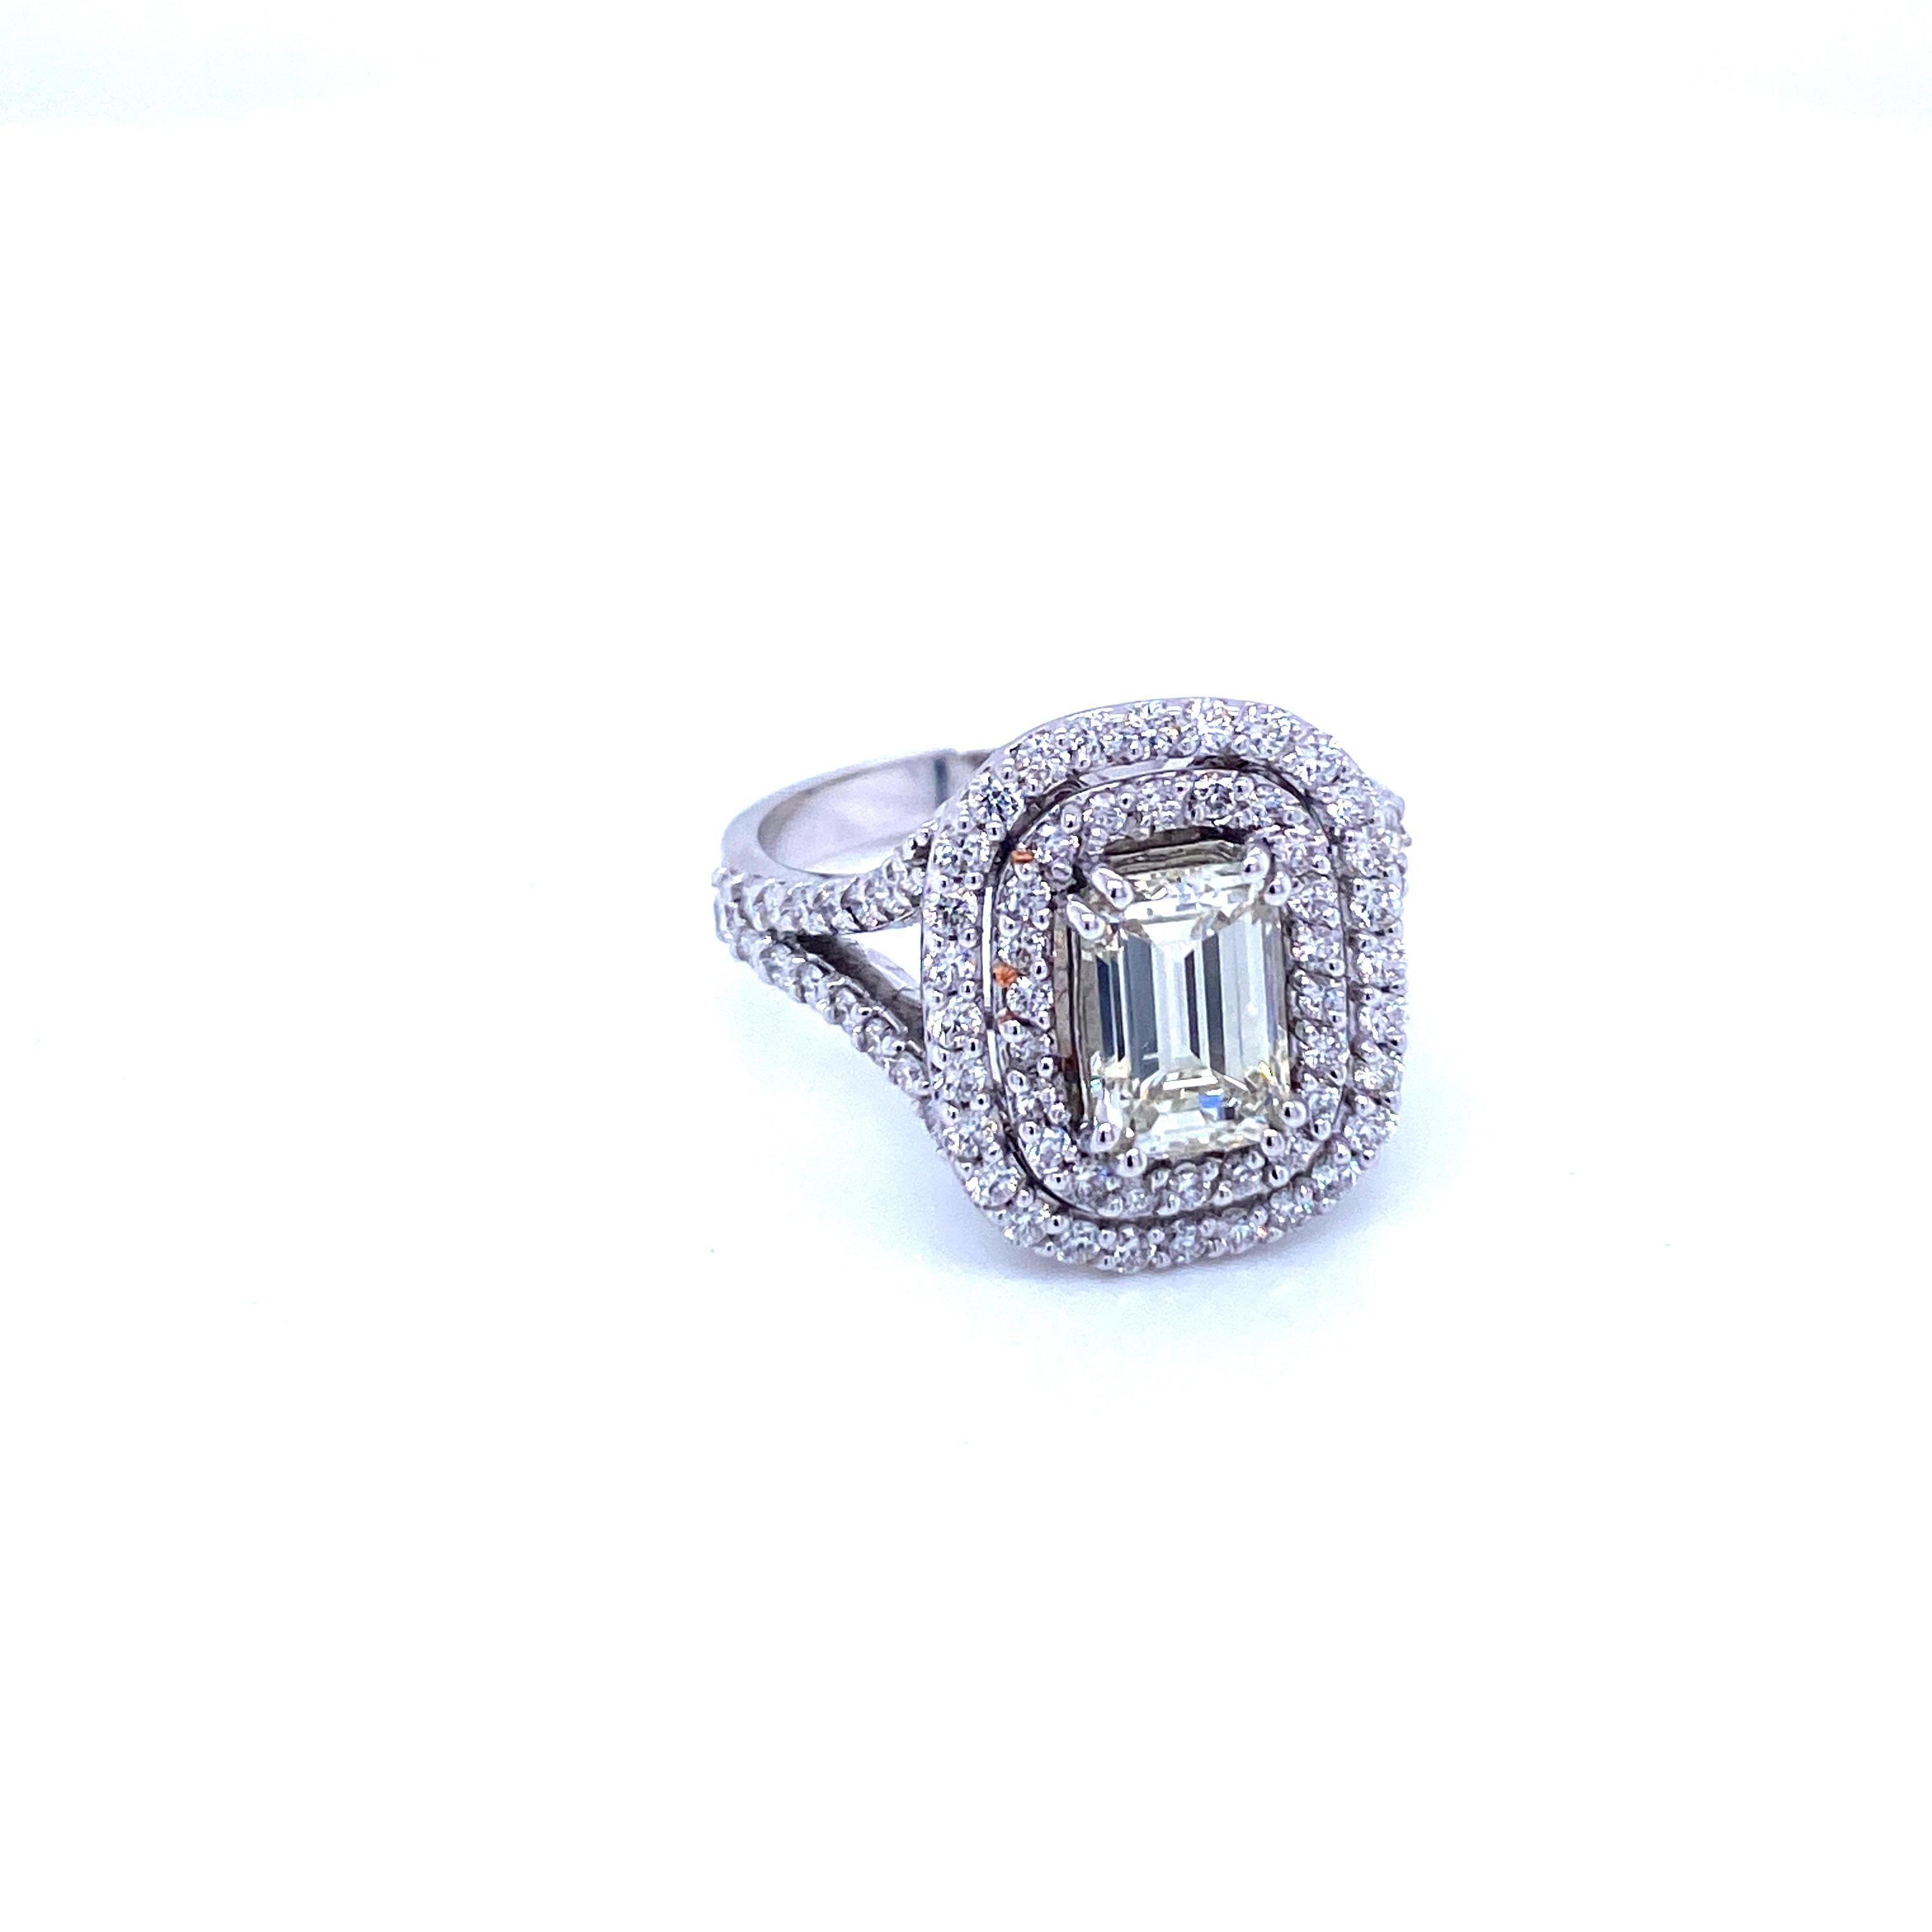 This beautiful handmade Diamond Ring is hand crafted in solid 18k white gold.
Made by master jewelers in Italy, the quality of the craftsmanship and setting is excellent.

The large center Diamond Emerald cut weight is 1.48 cts, graded K color vvs2